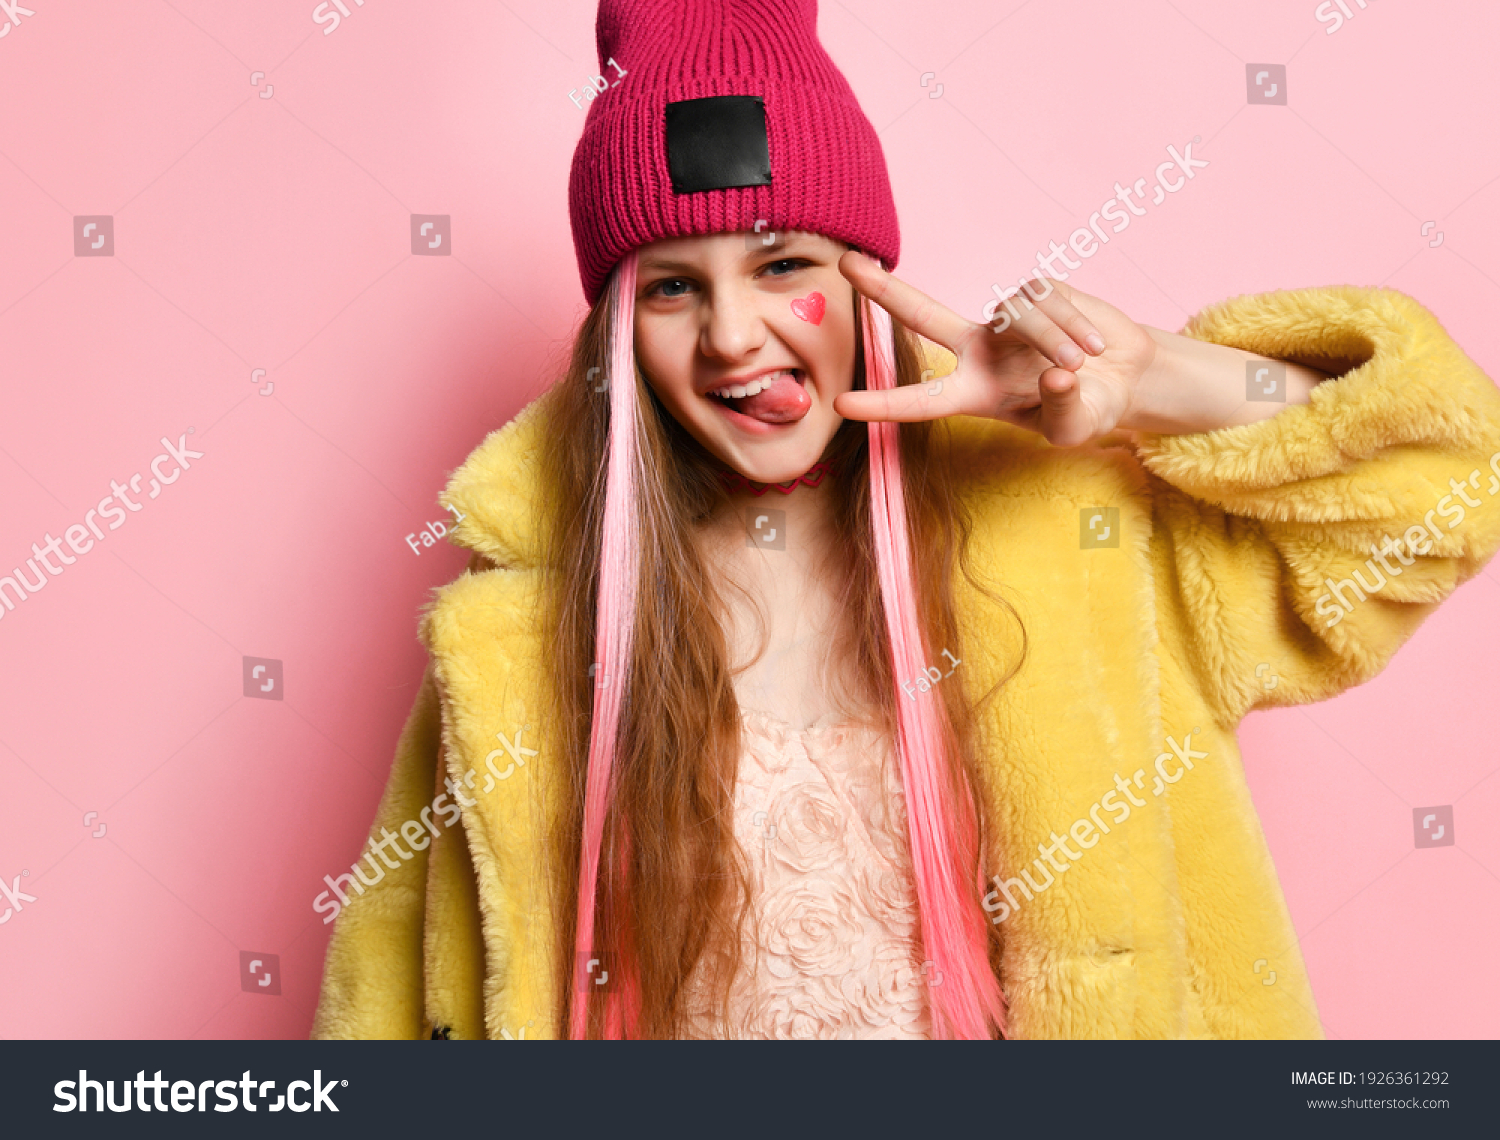 Close up portrait of an active and cheerful teenage girl who is showing V-sign with her fingers and tongue. Little rebel in a pink hat, yellow fur coat posing on a pink background. Adolescence concept #1926361292